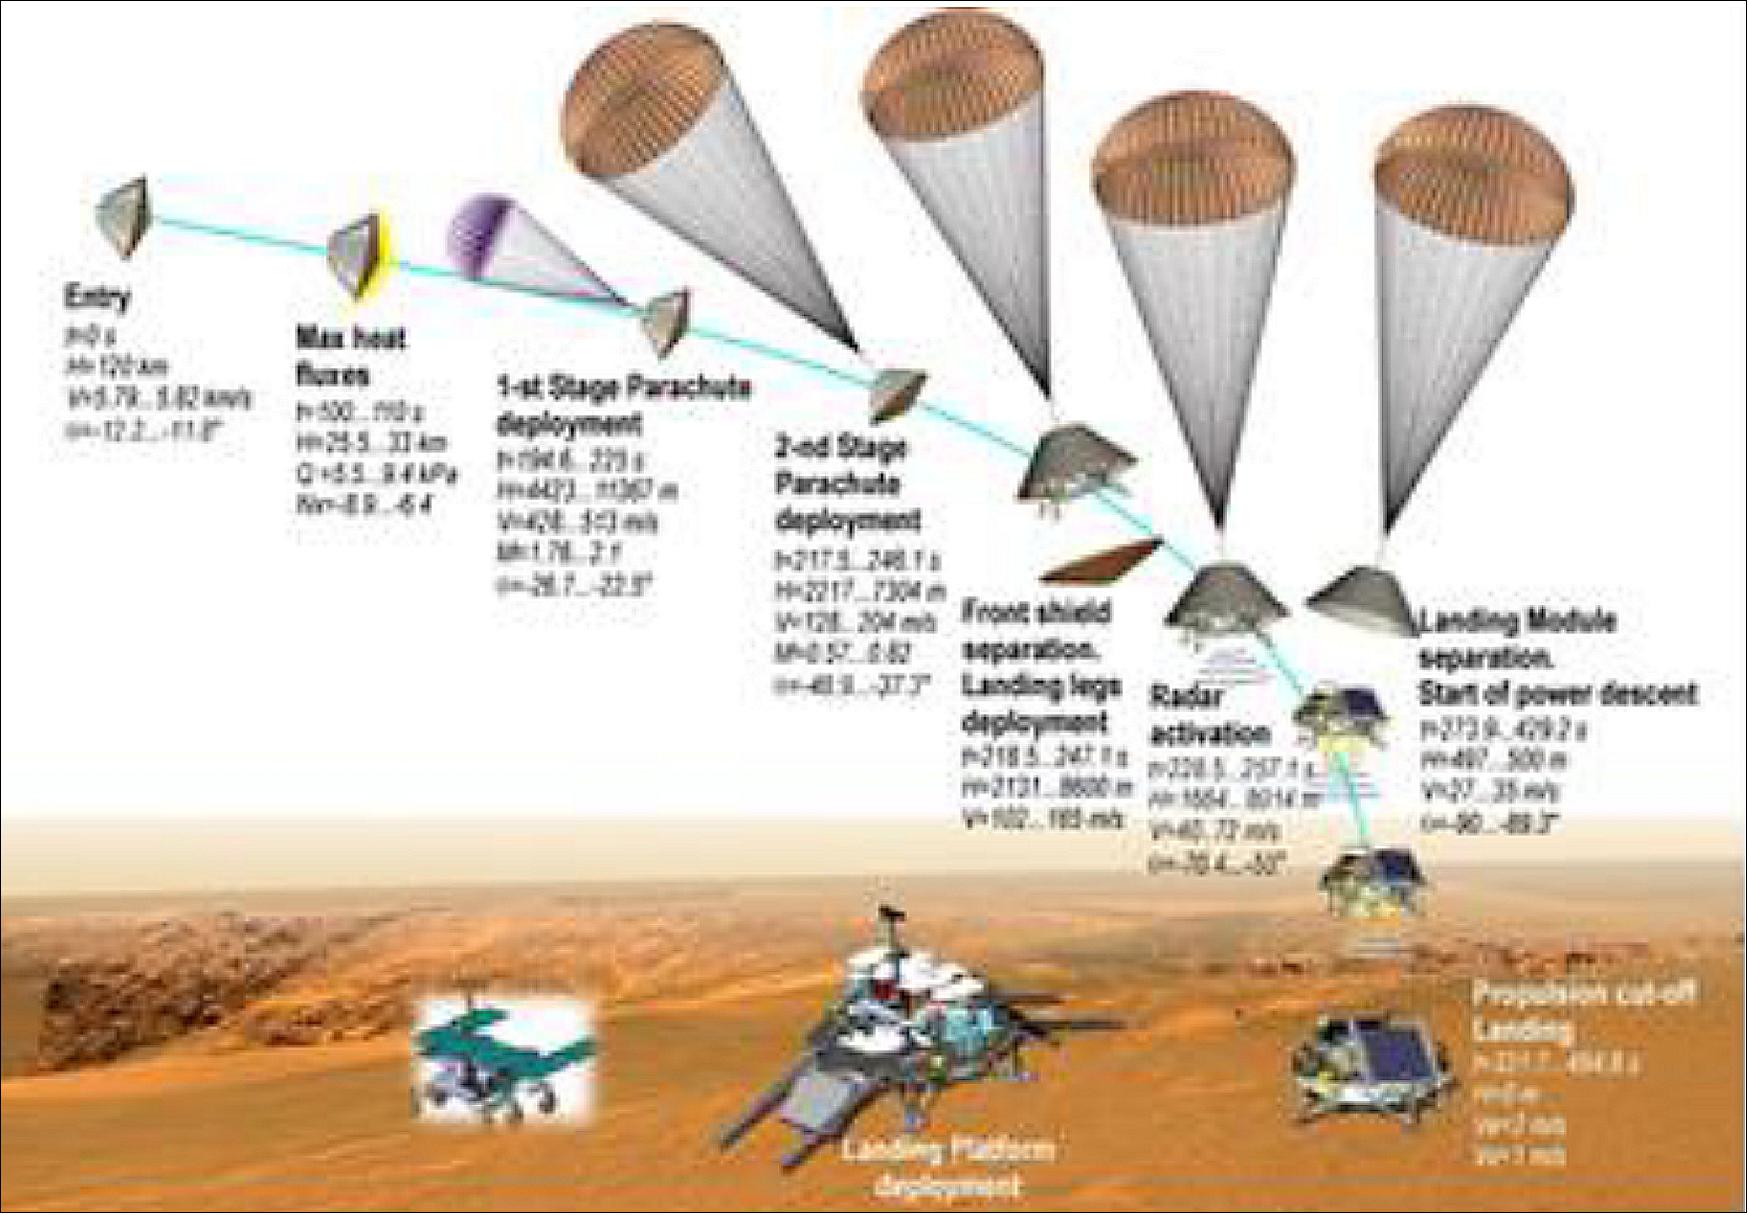 Figure 2: EDL (Entry Descent and Landing) phase of ExoMars (image credit: ExoMars collaboration)